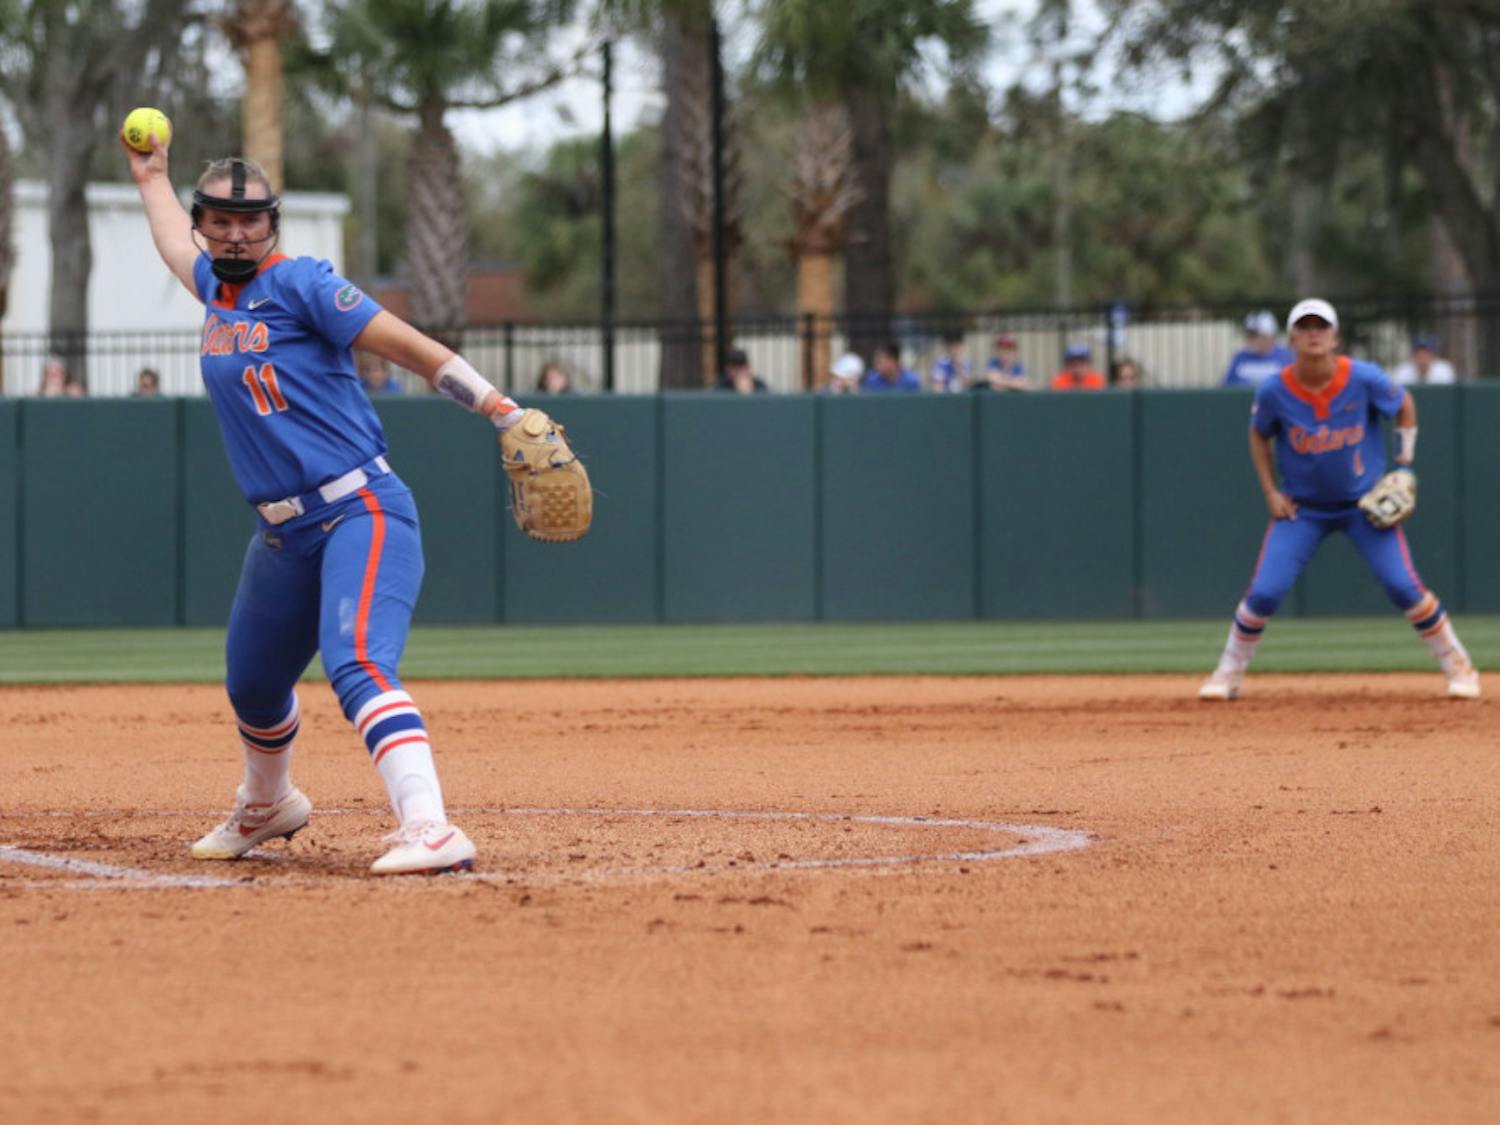 Kelly Barnhill pitched two innings and allowed six hits and four runs in the Gators 7-1 loss to UCLA on Wednesday.